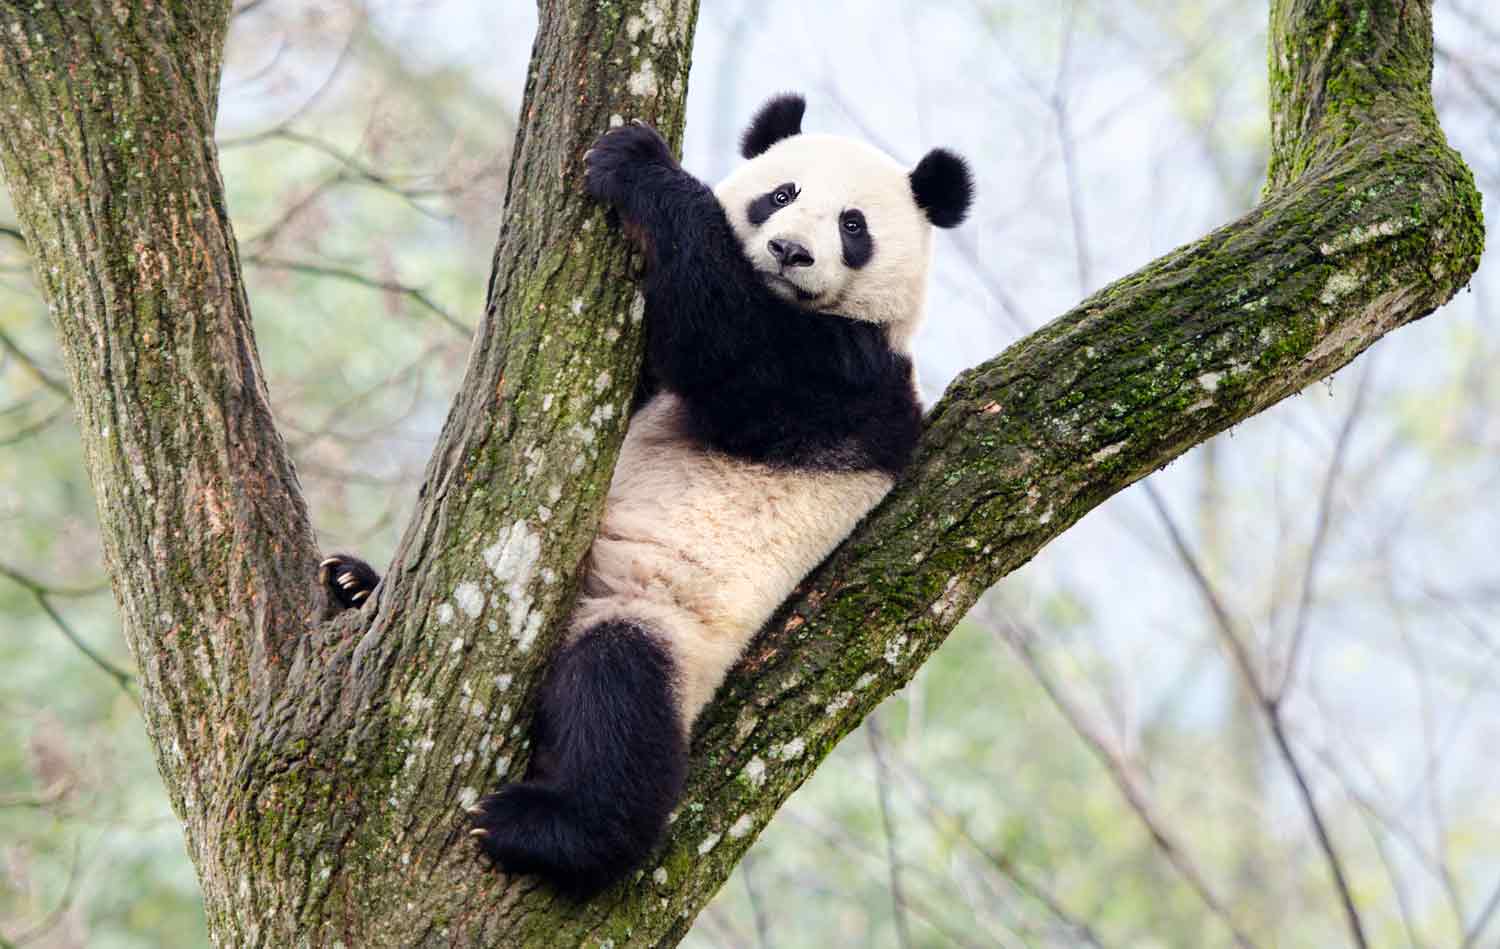 A giant panda sits between two branches high in a tree.